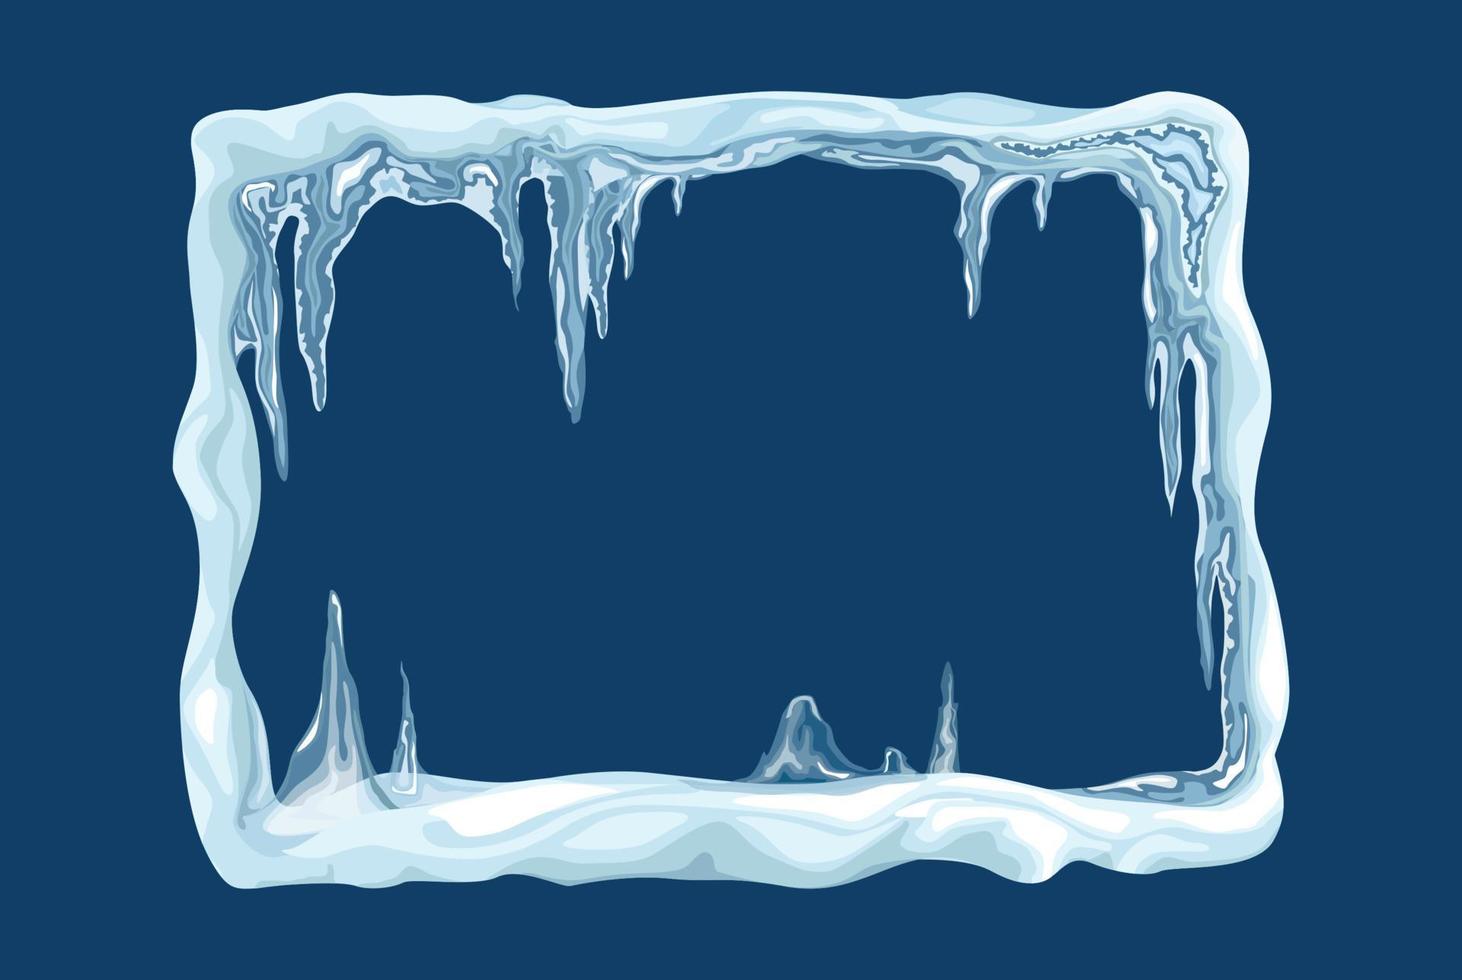 Snow Frame At Blue Background vector